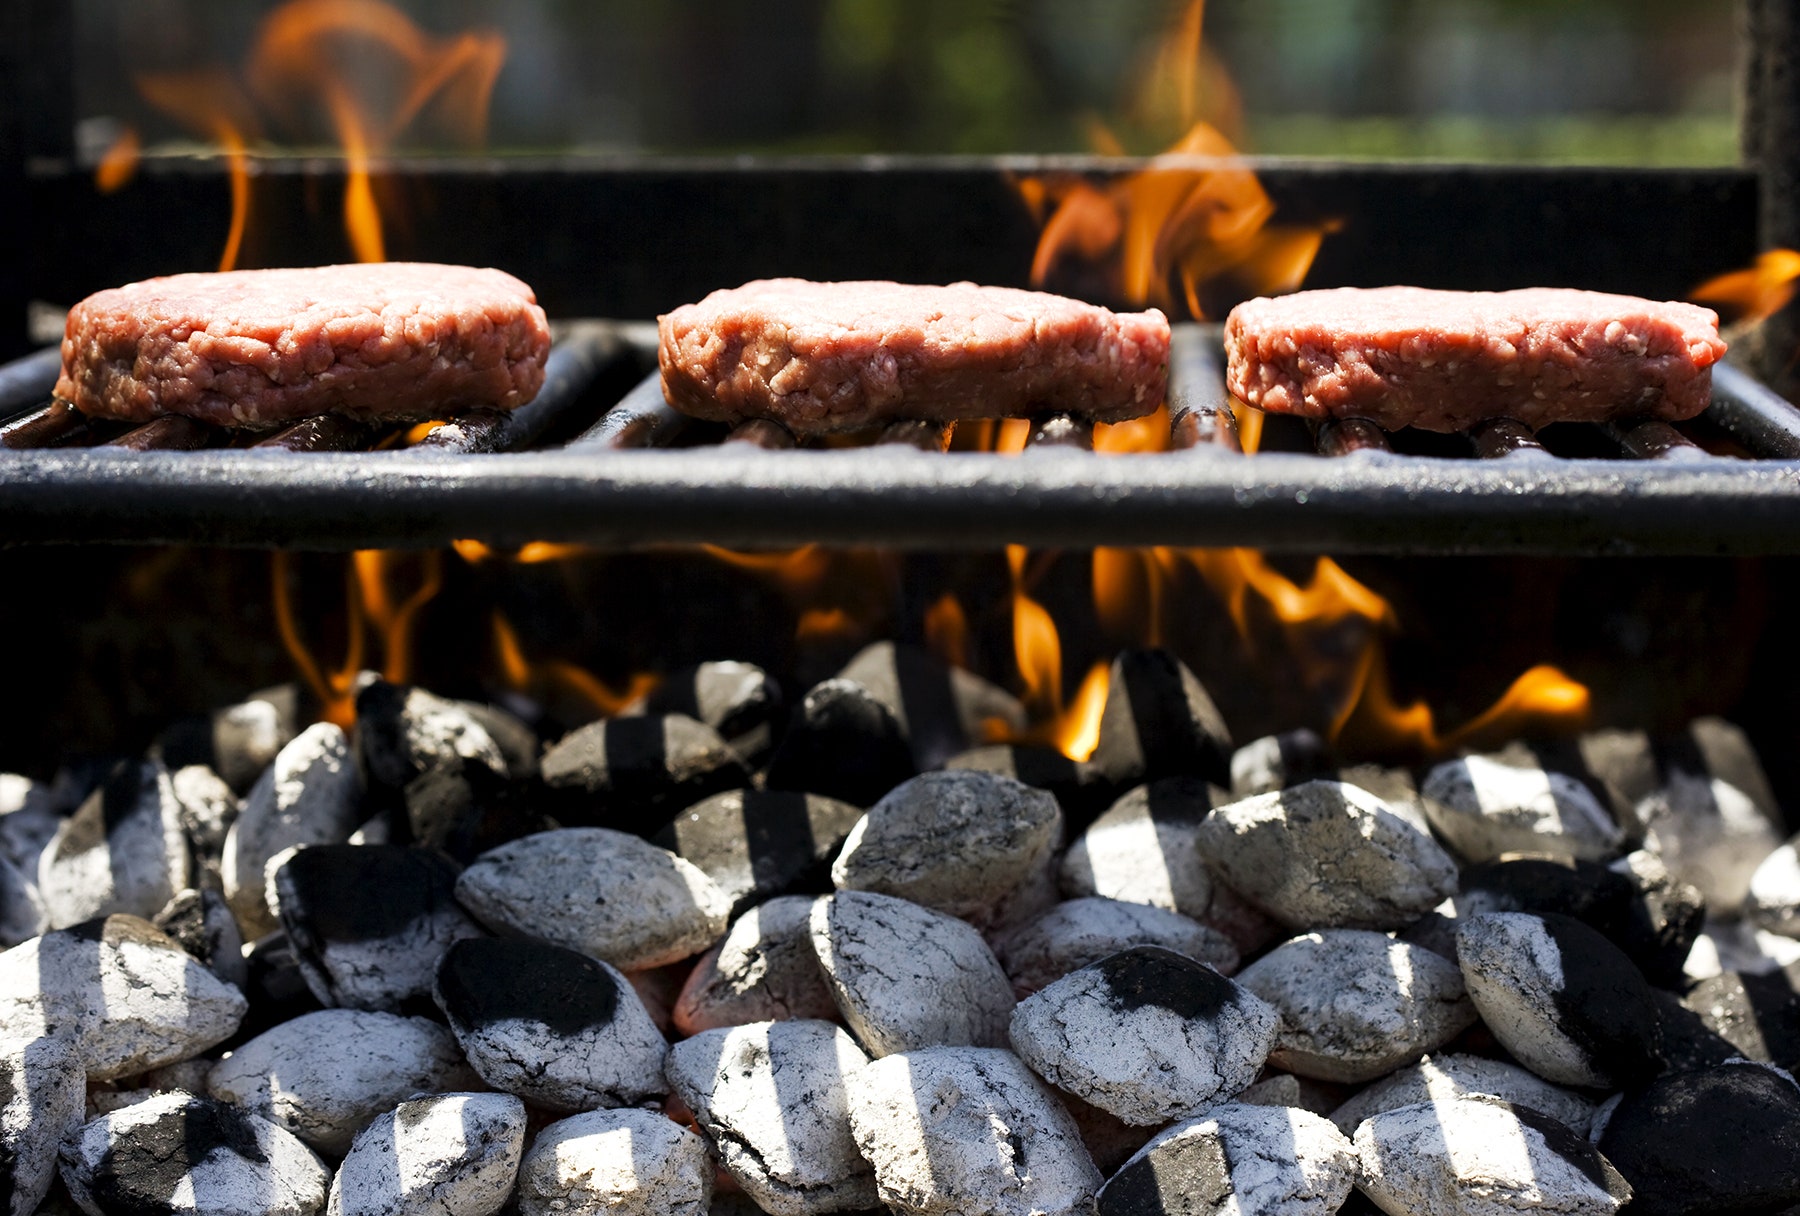 Apartment Grilling Solutions: Choosing the Best Barbecue for Your Balcony
